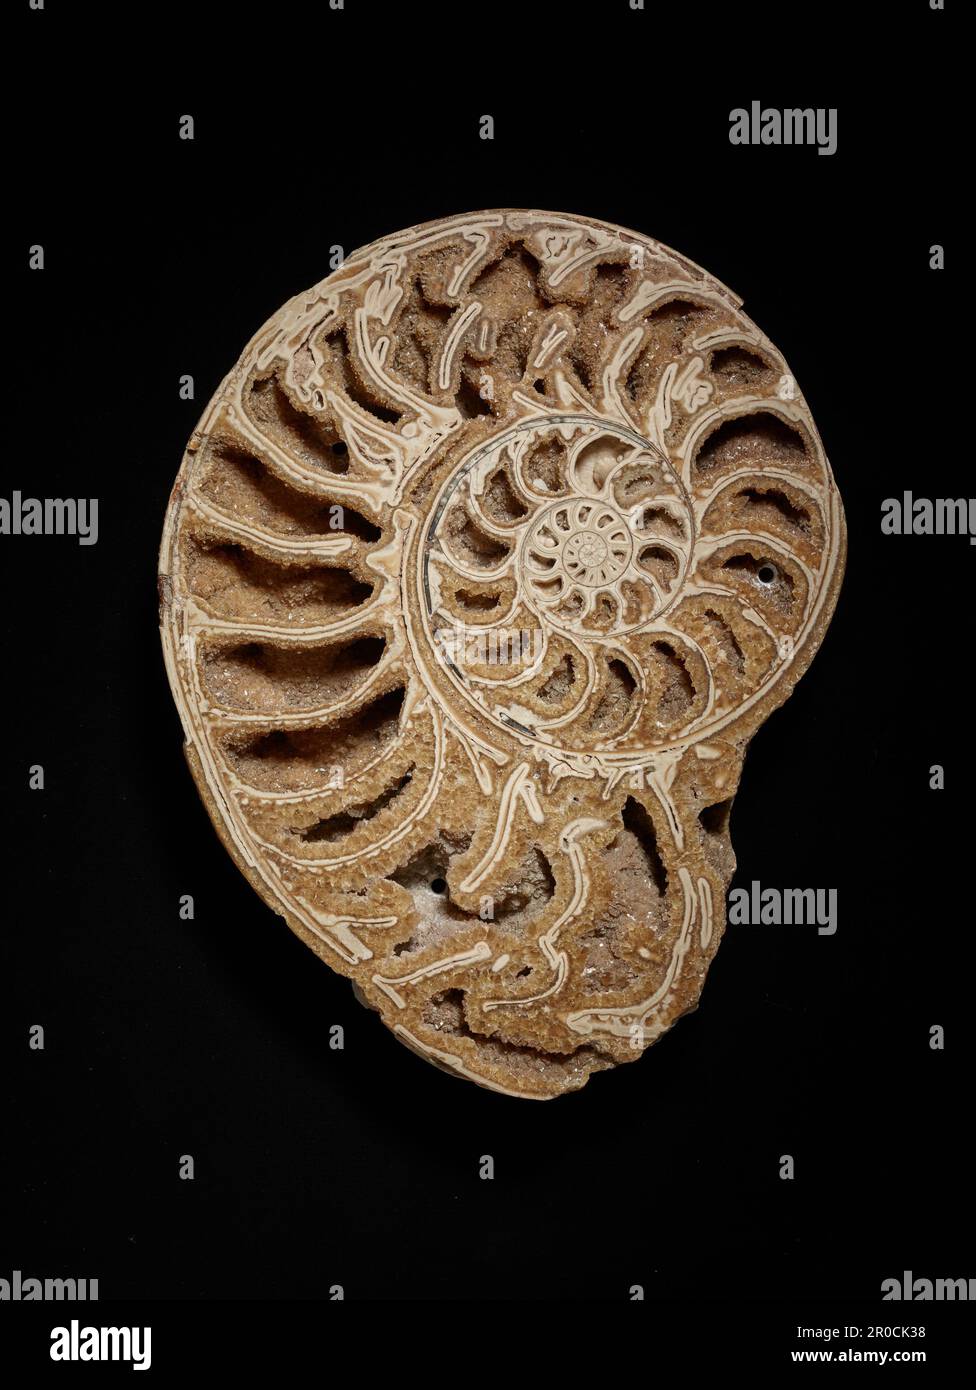 Sectioned Ammonite. Natural Science Collection - Palaeontology Stock Photo